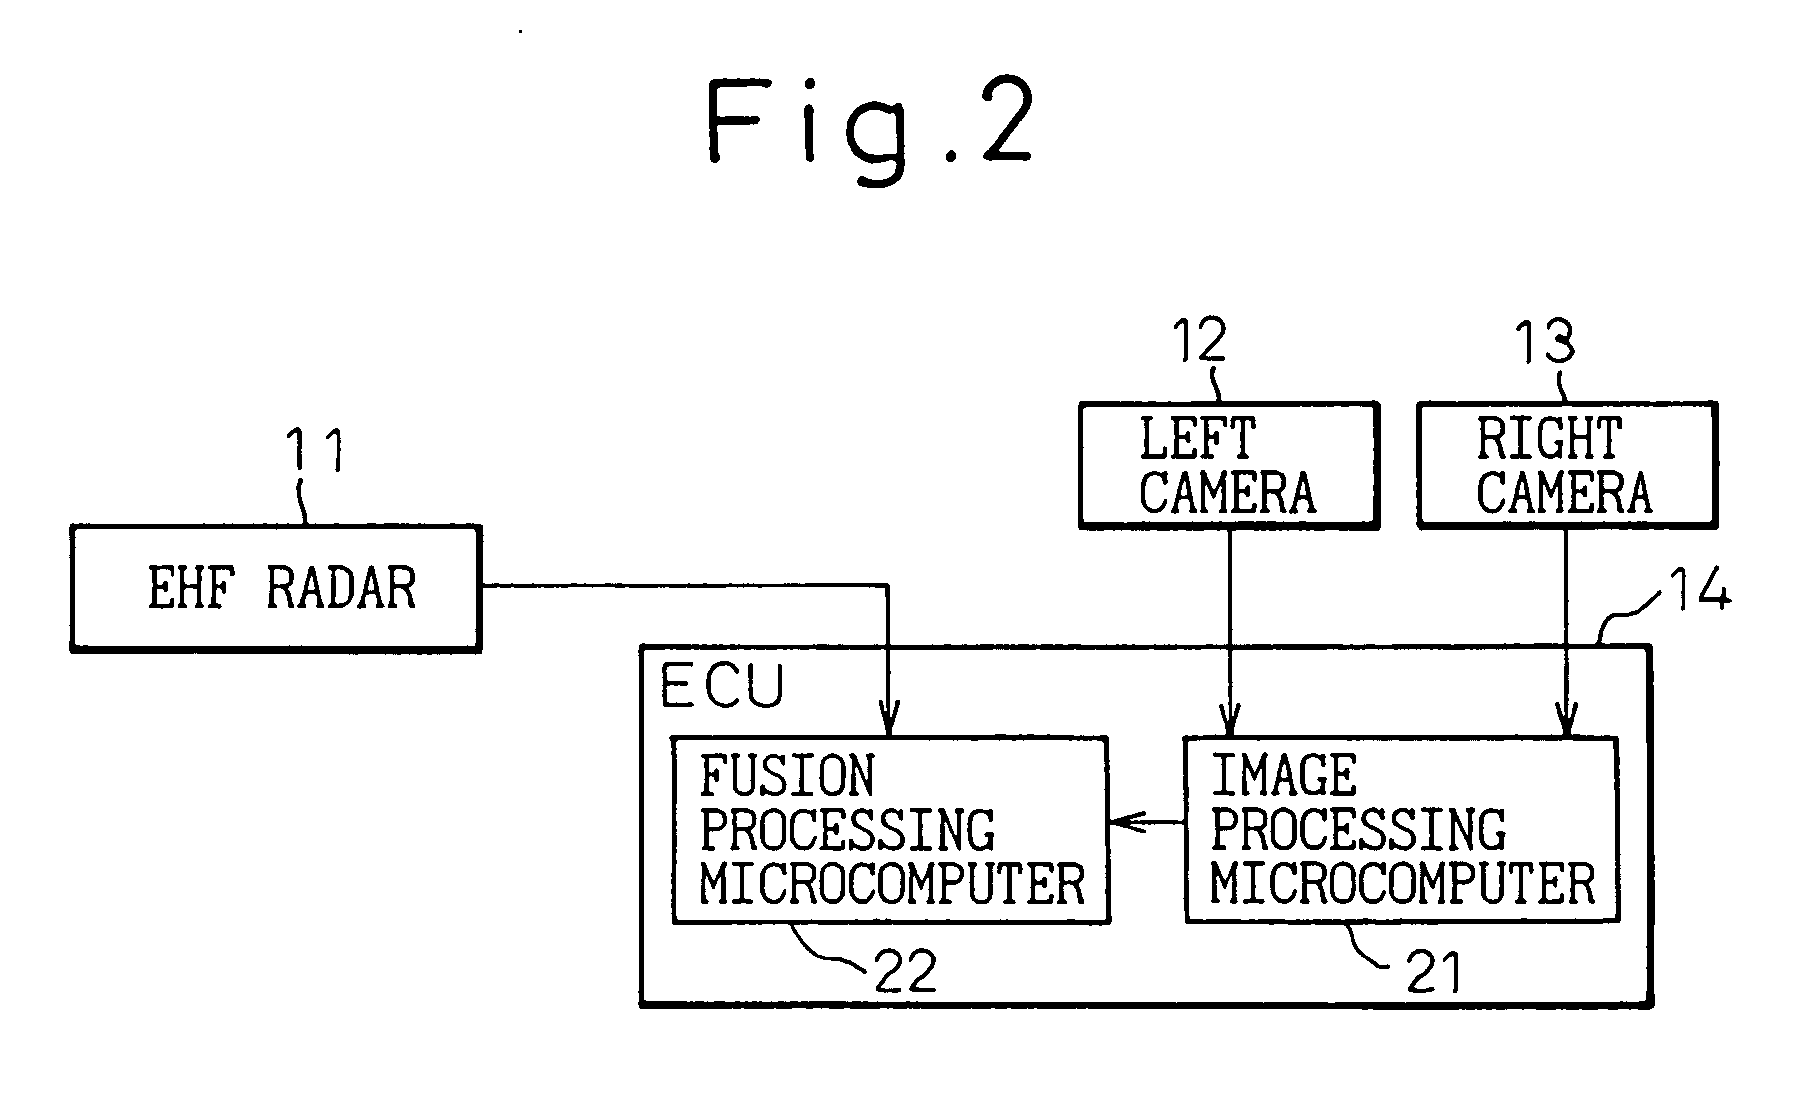 Target detection system using radar and image processing